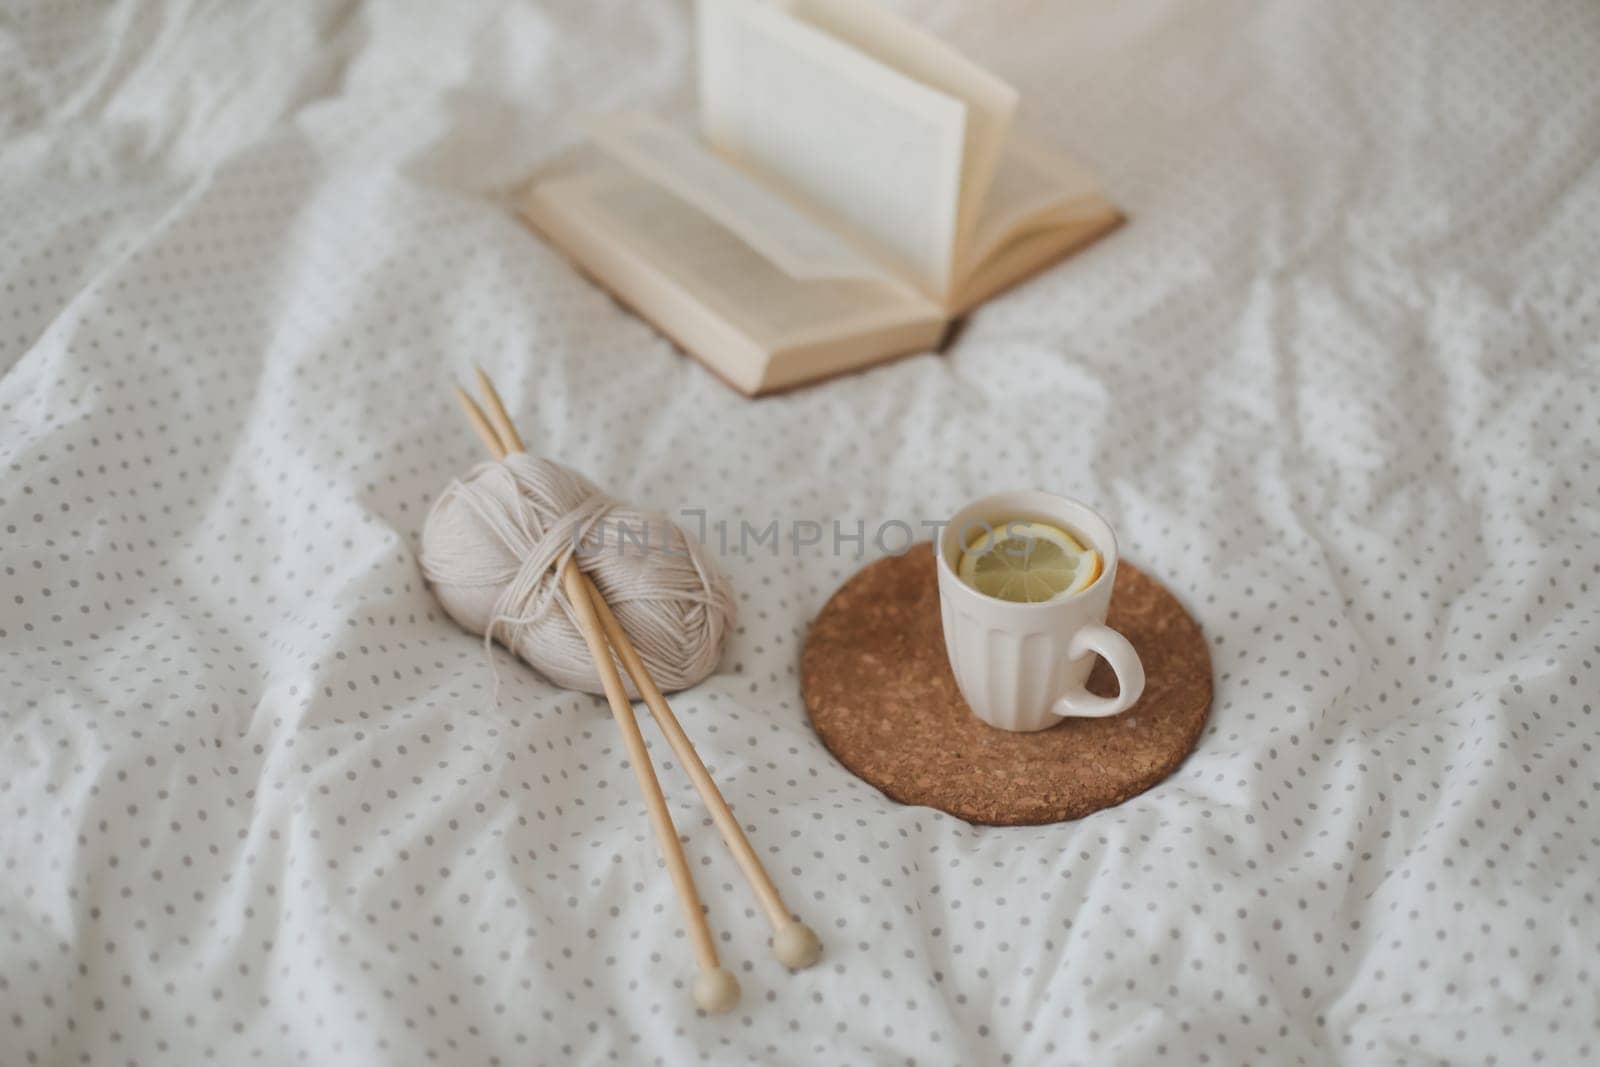 Cozy morning still life with a cup, candle, needles and a woolen yarn in white bed. Knitting warm woolen sweater or scarf top view. Hygge lifestyle, cozy mood. Handicraft day concept. by paralisart